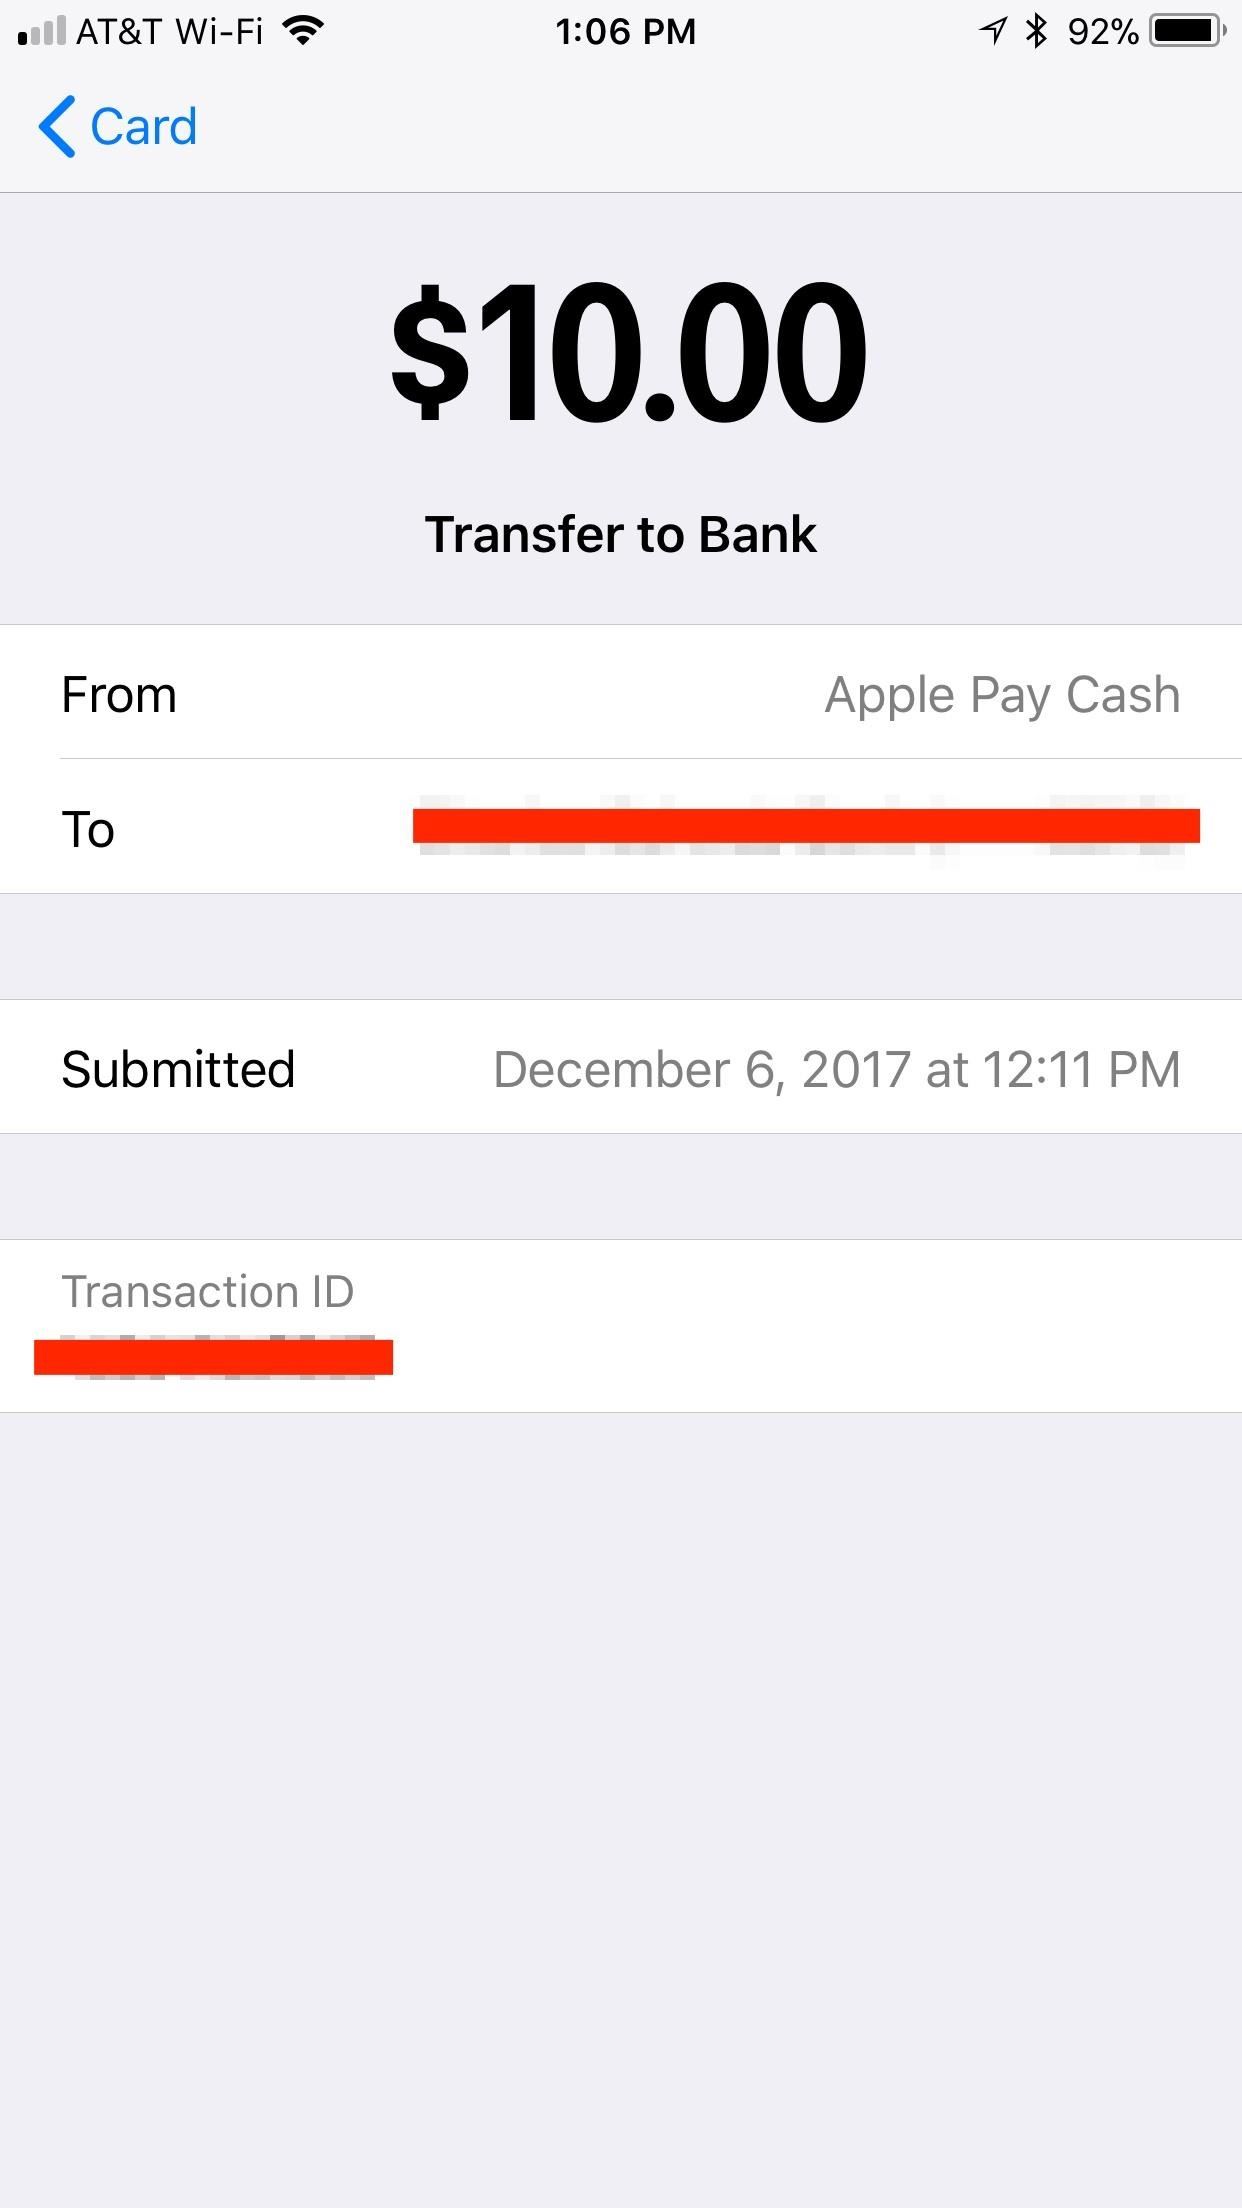 Apple Pay Cash 101: How to View Your Transactions History